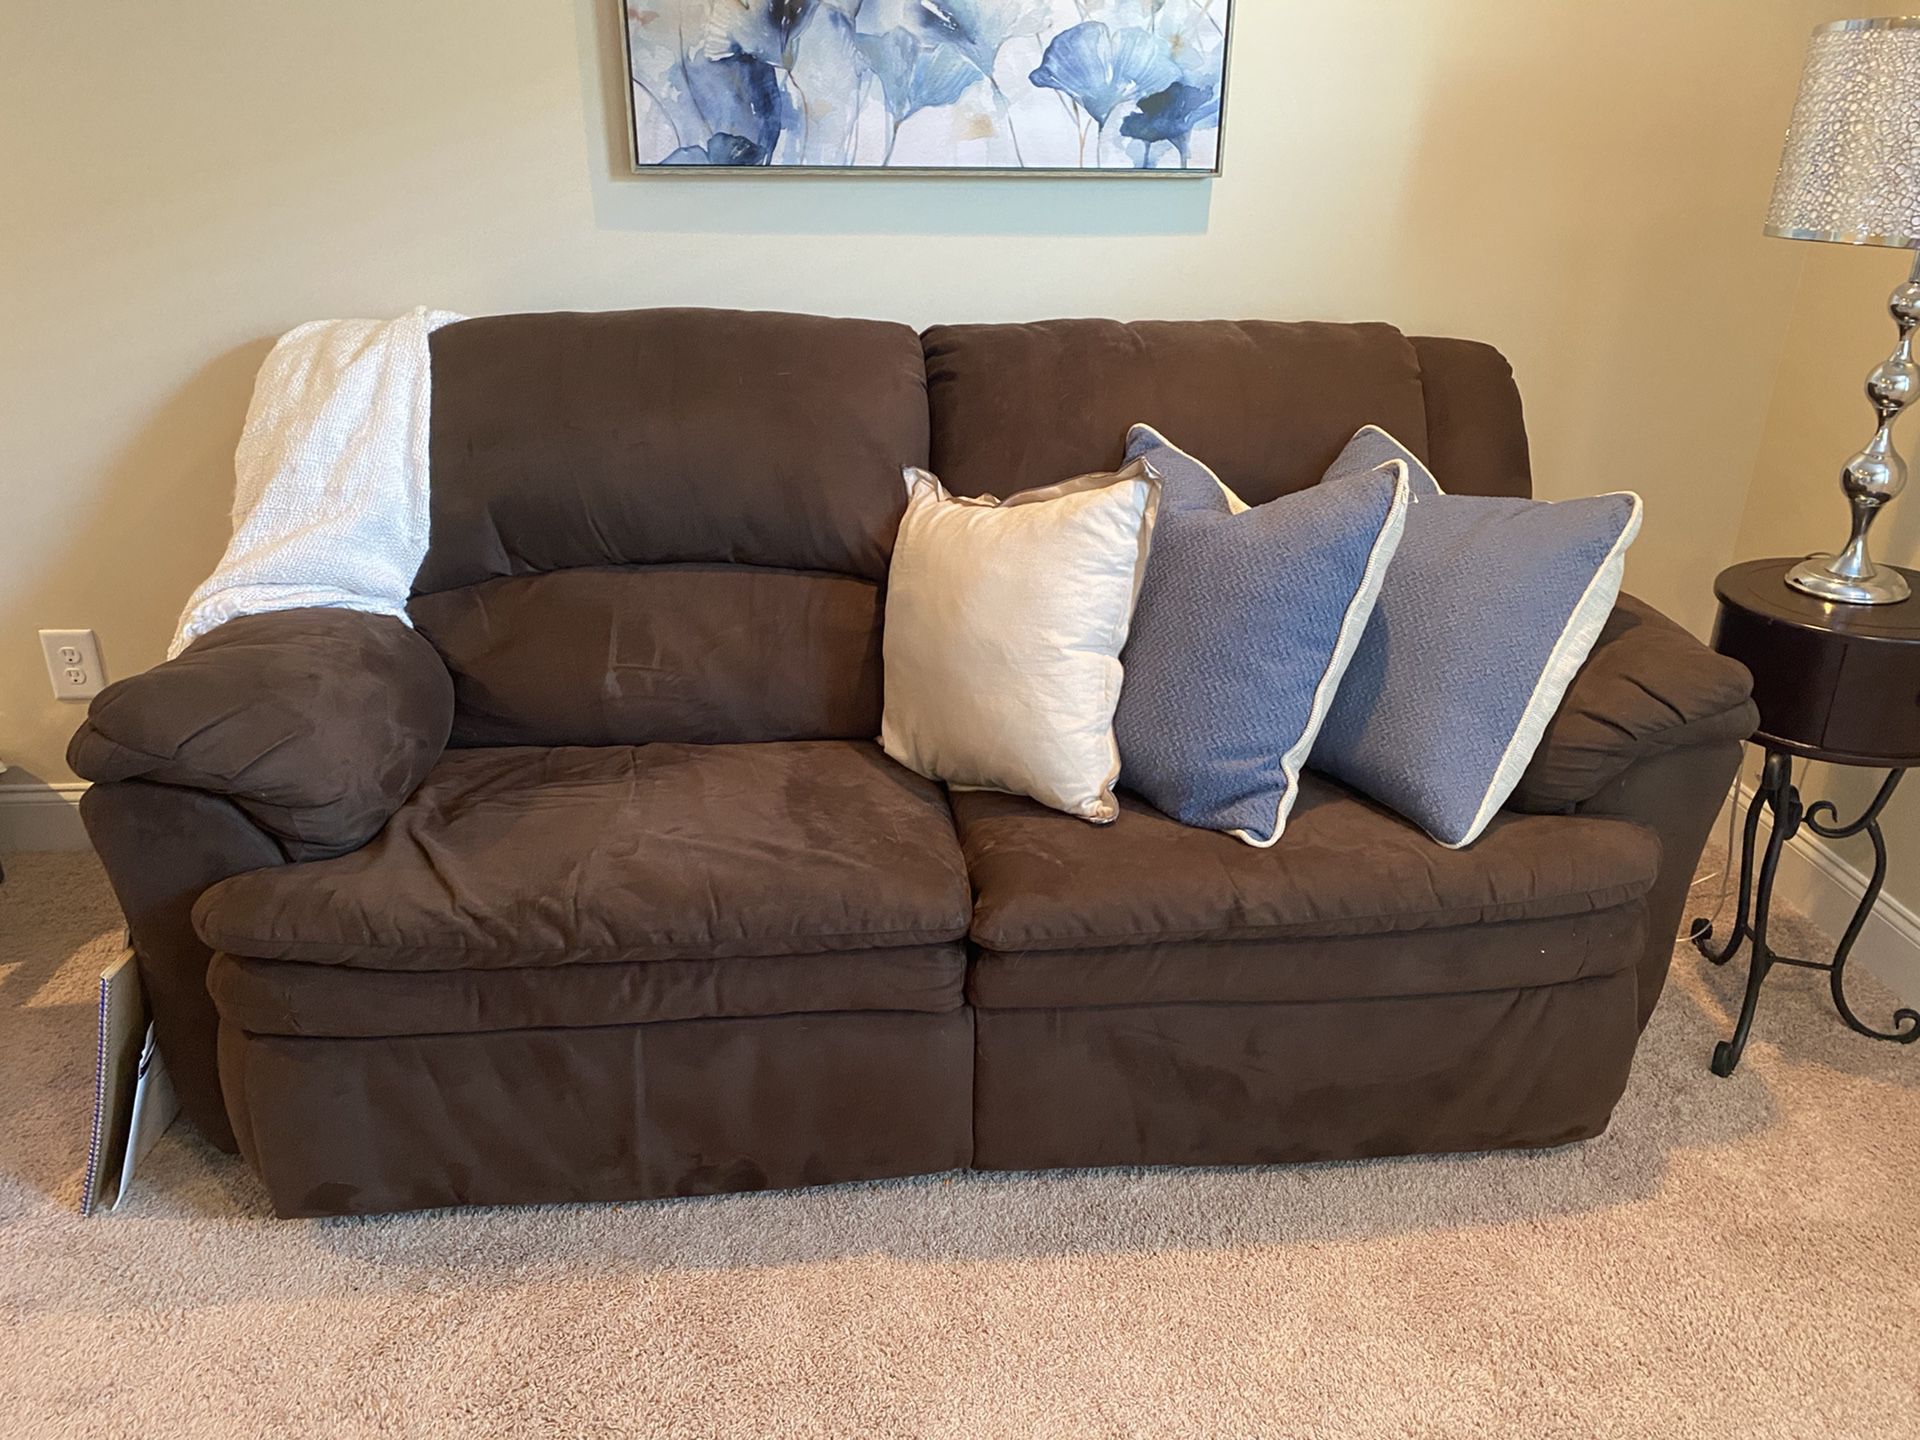 Must Sell! Brown Microfiber Loveseat Couch